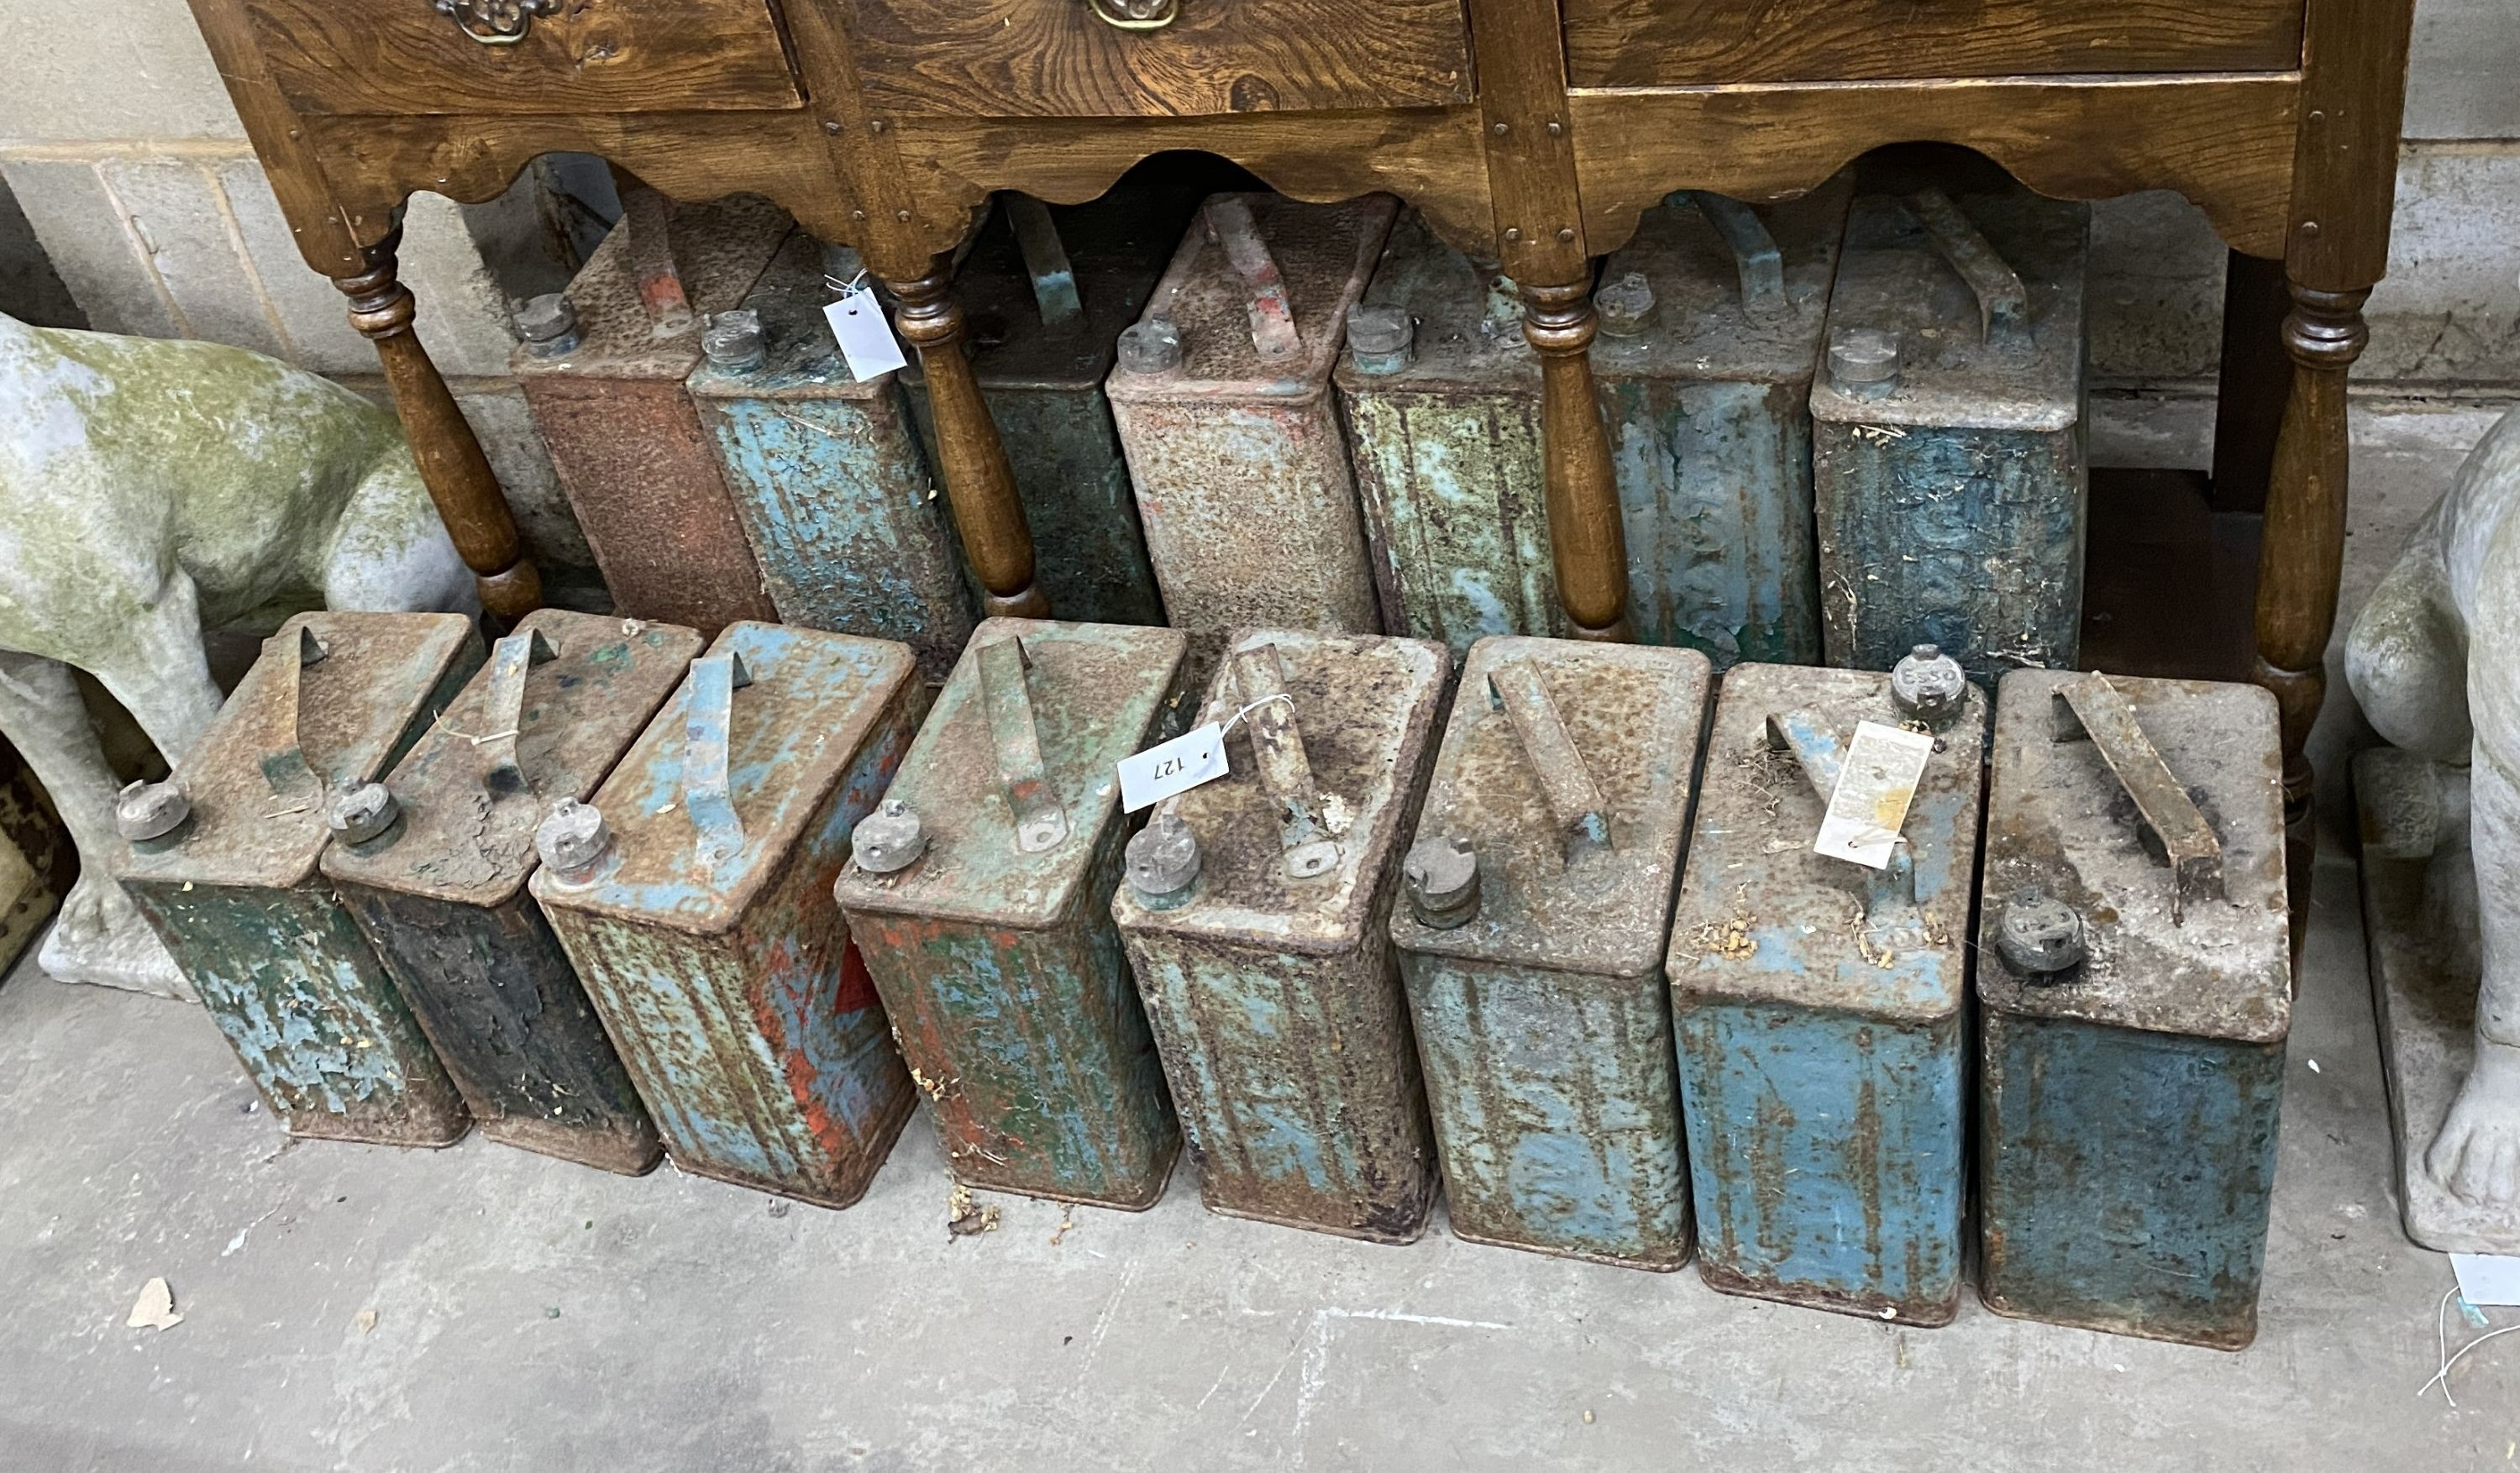 Fifteen assorted vintage Esso petrol cans